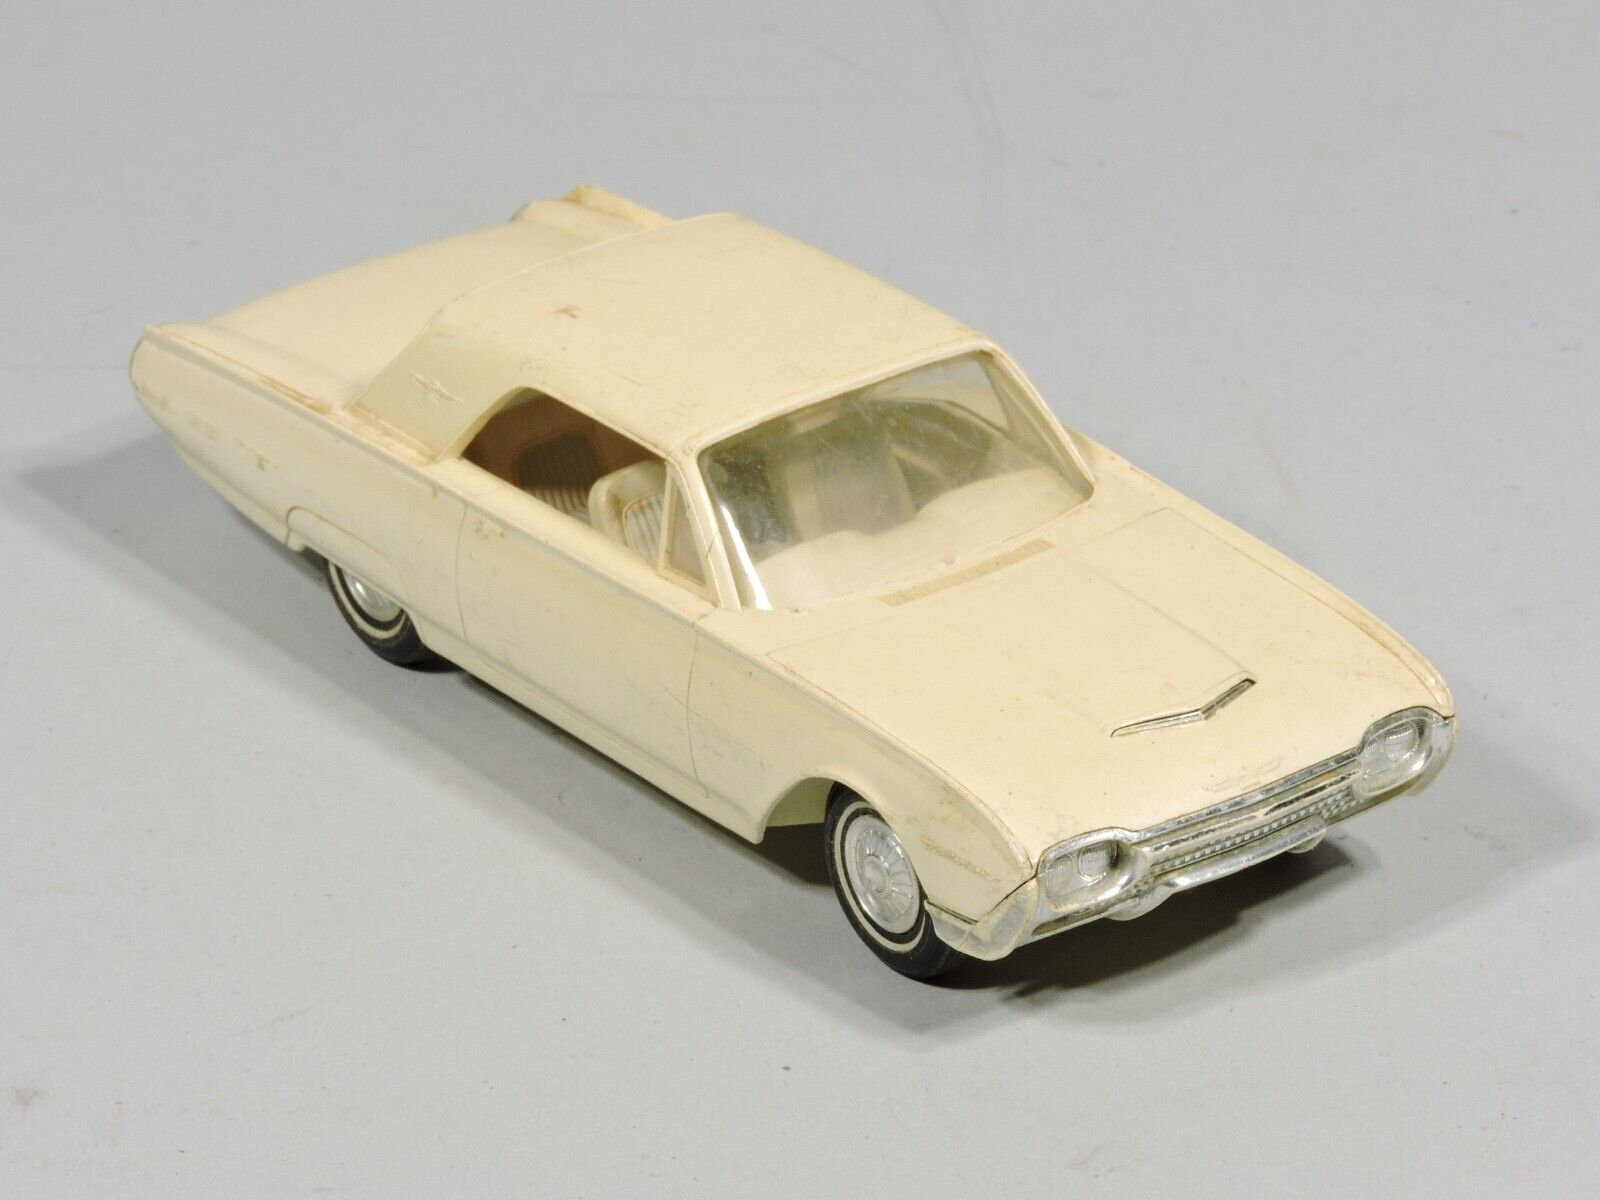 Vintage White 1962 FORD Thunderbird Hardtop Showroom Promotional Model by AMT